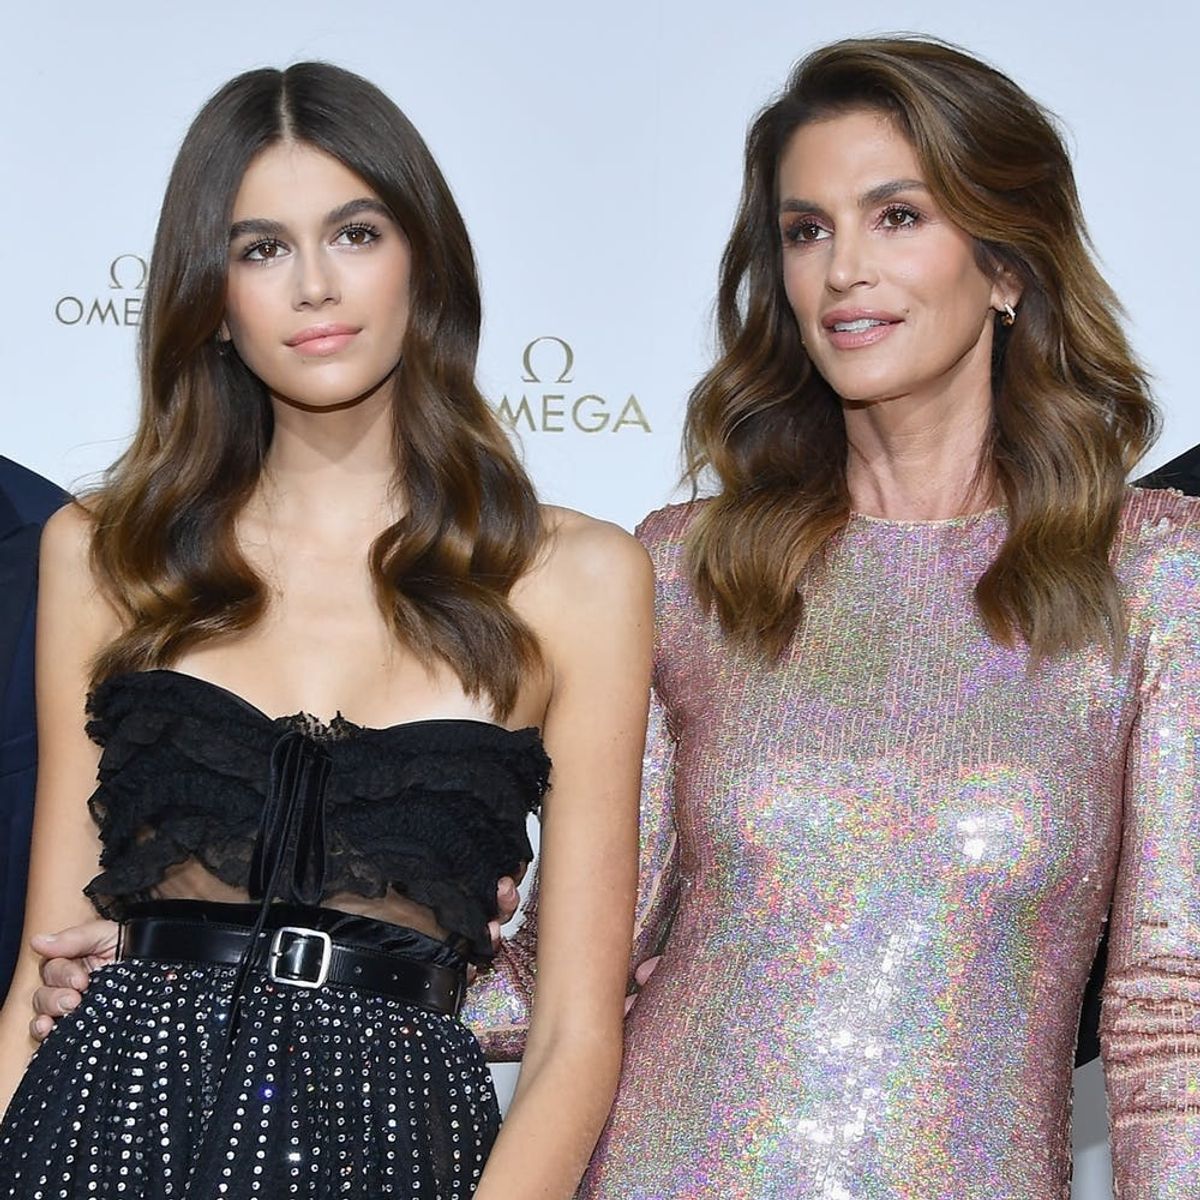 Kaia Gerber Looks Exactly Like Cindy Crawford in Their Yearbook Photos